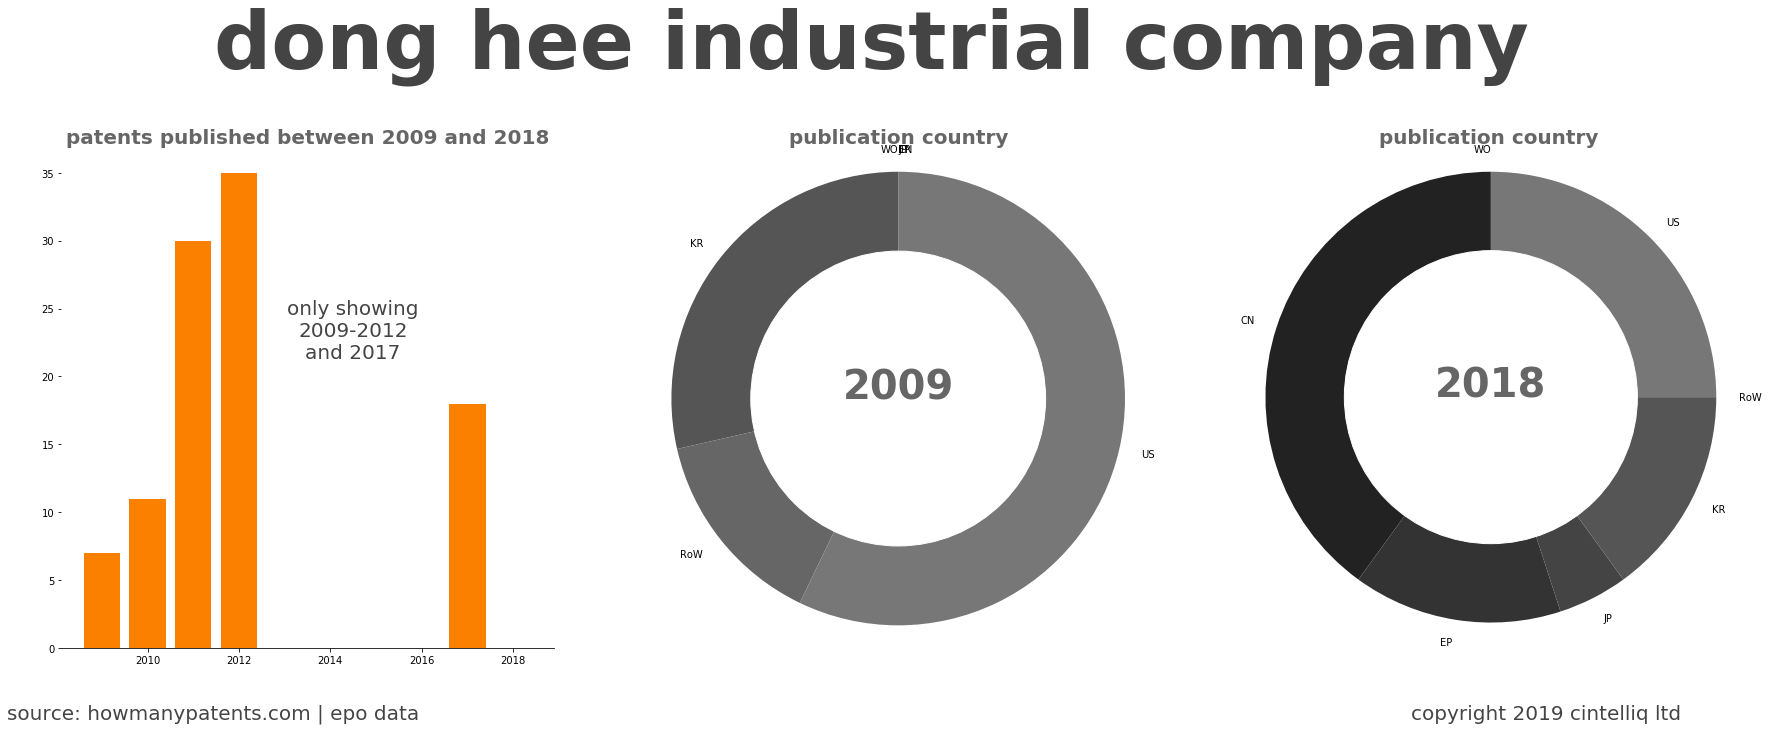 summary of patents for Dong Hee Industrial Company